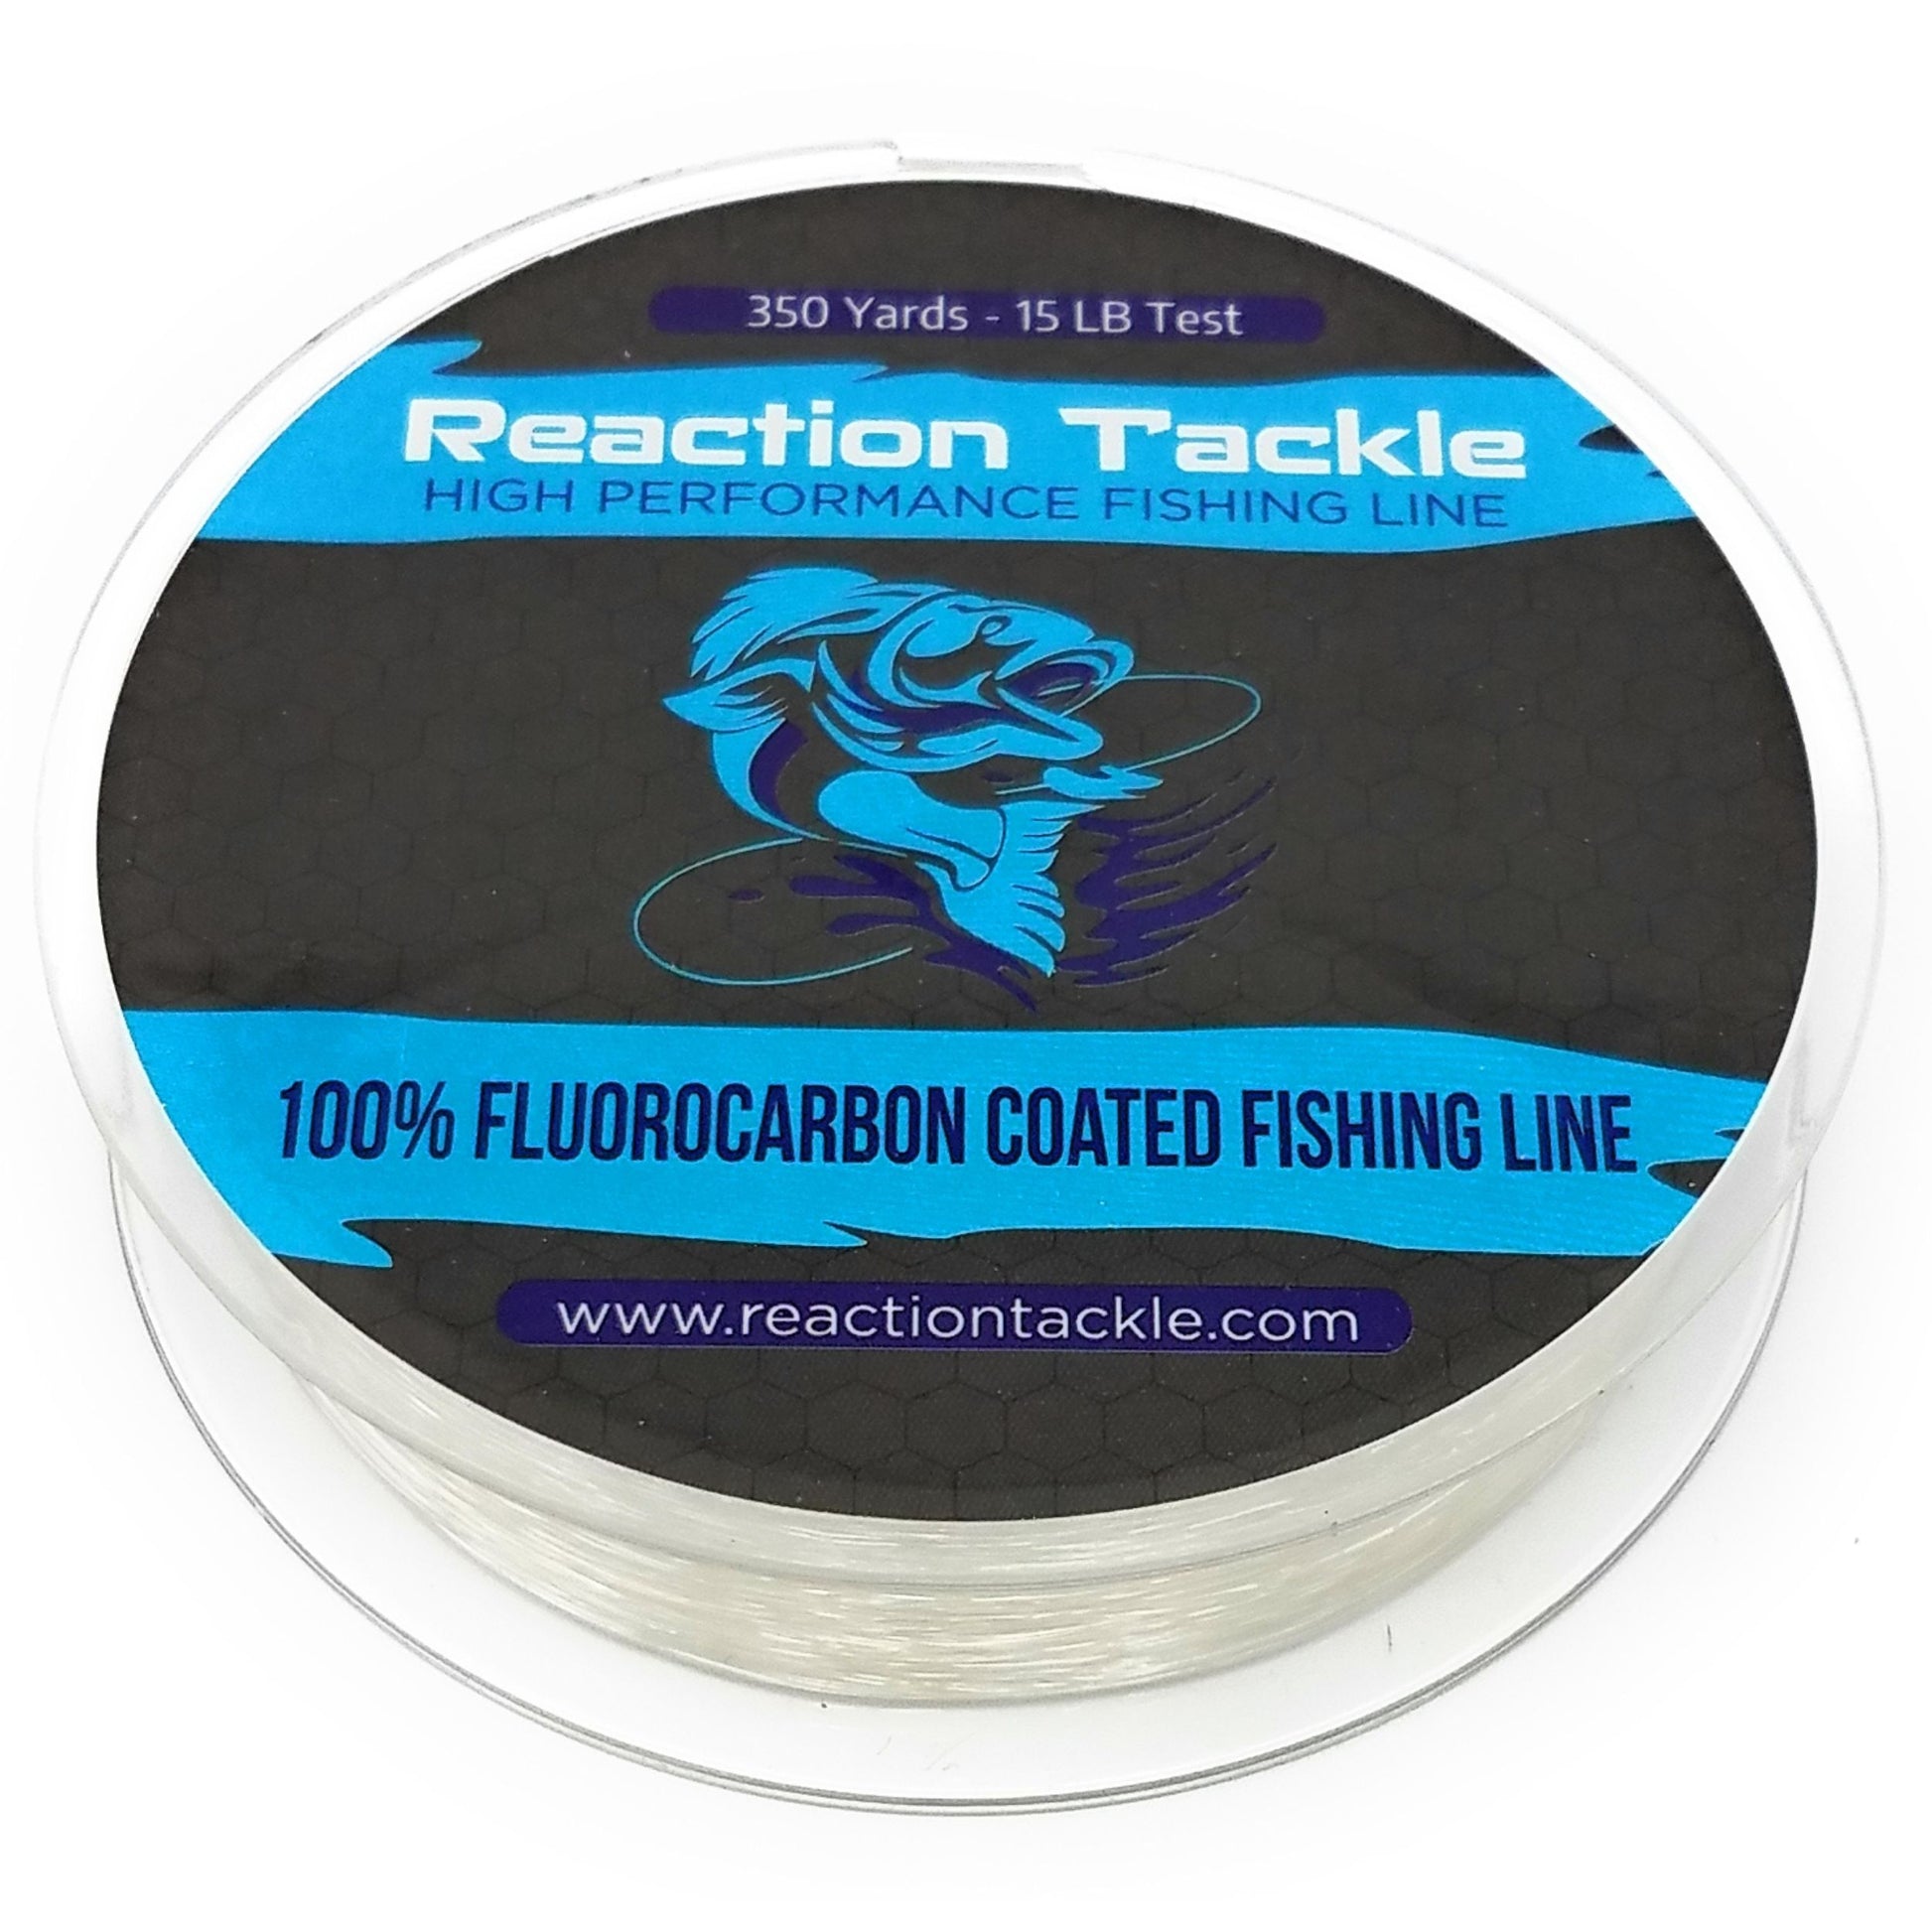 Reaction Tackle Monofilament Fishing line- Various Sizes and